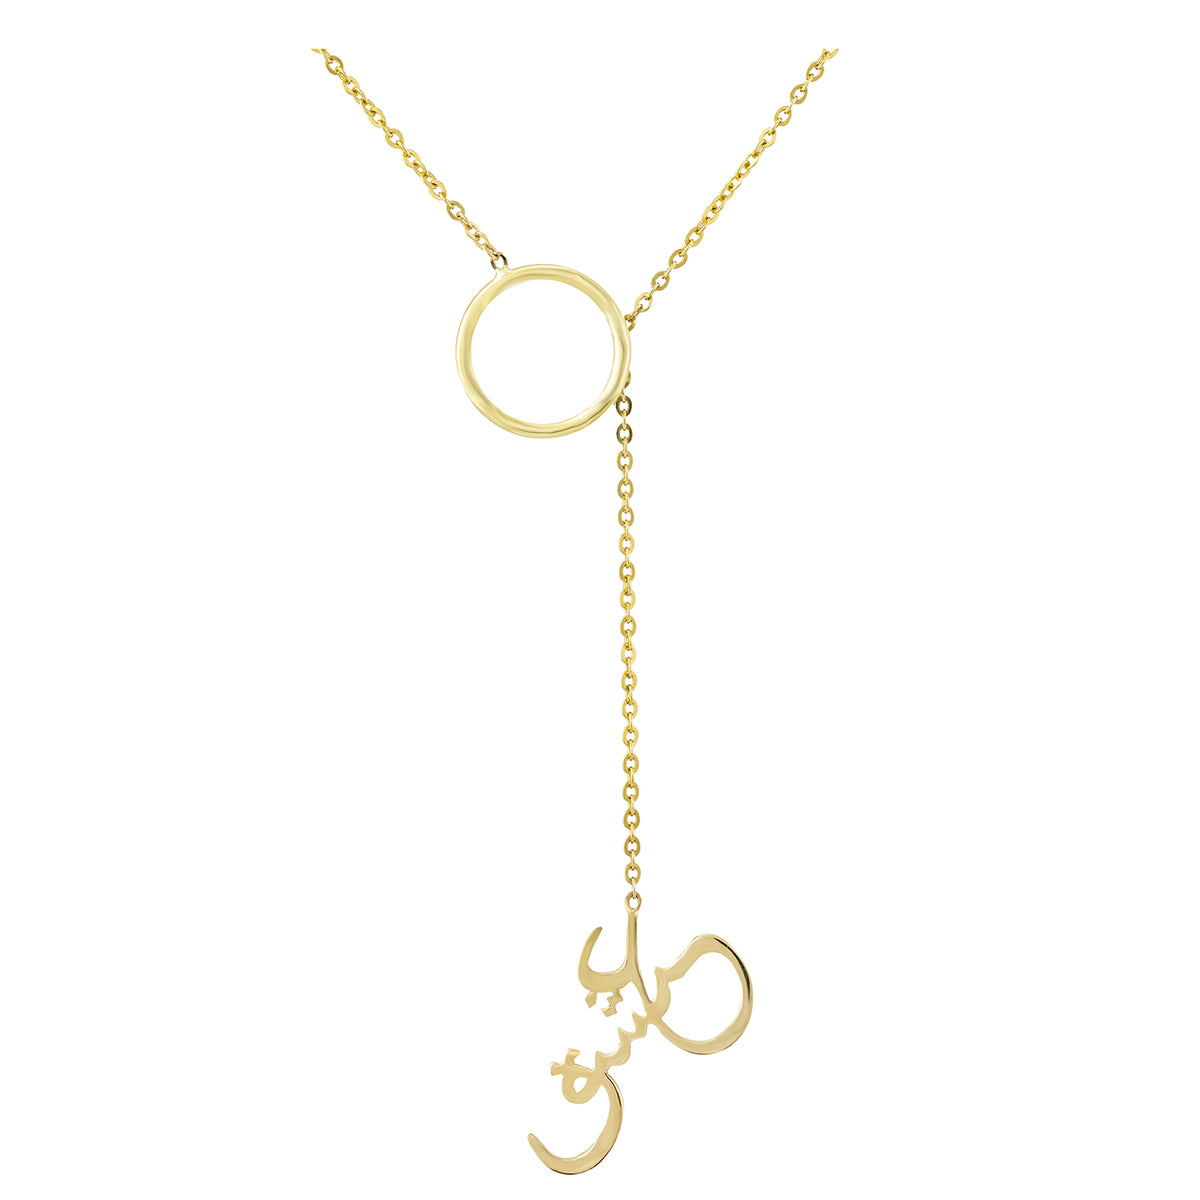 Chain Necklace in 18K Yellow Gold